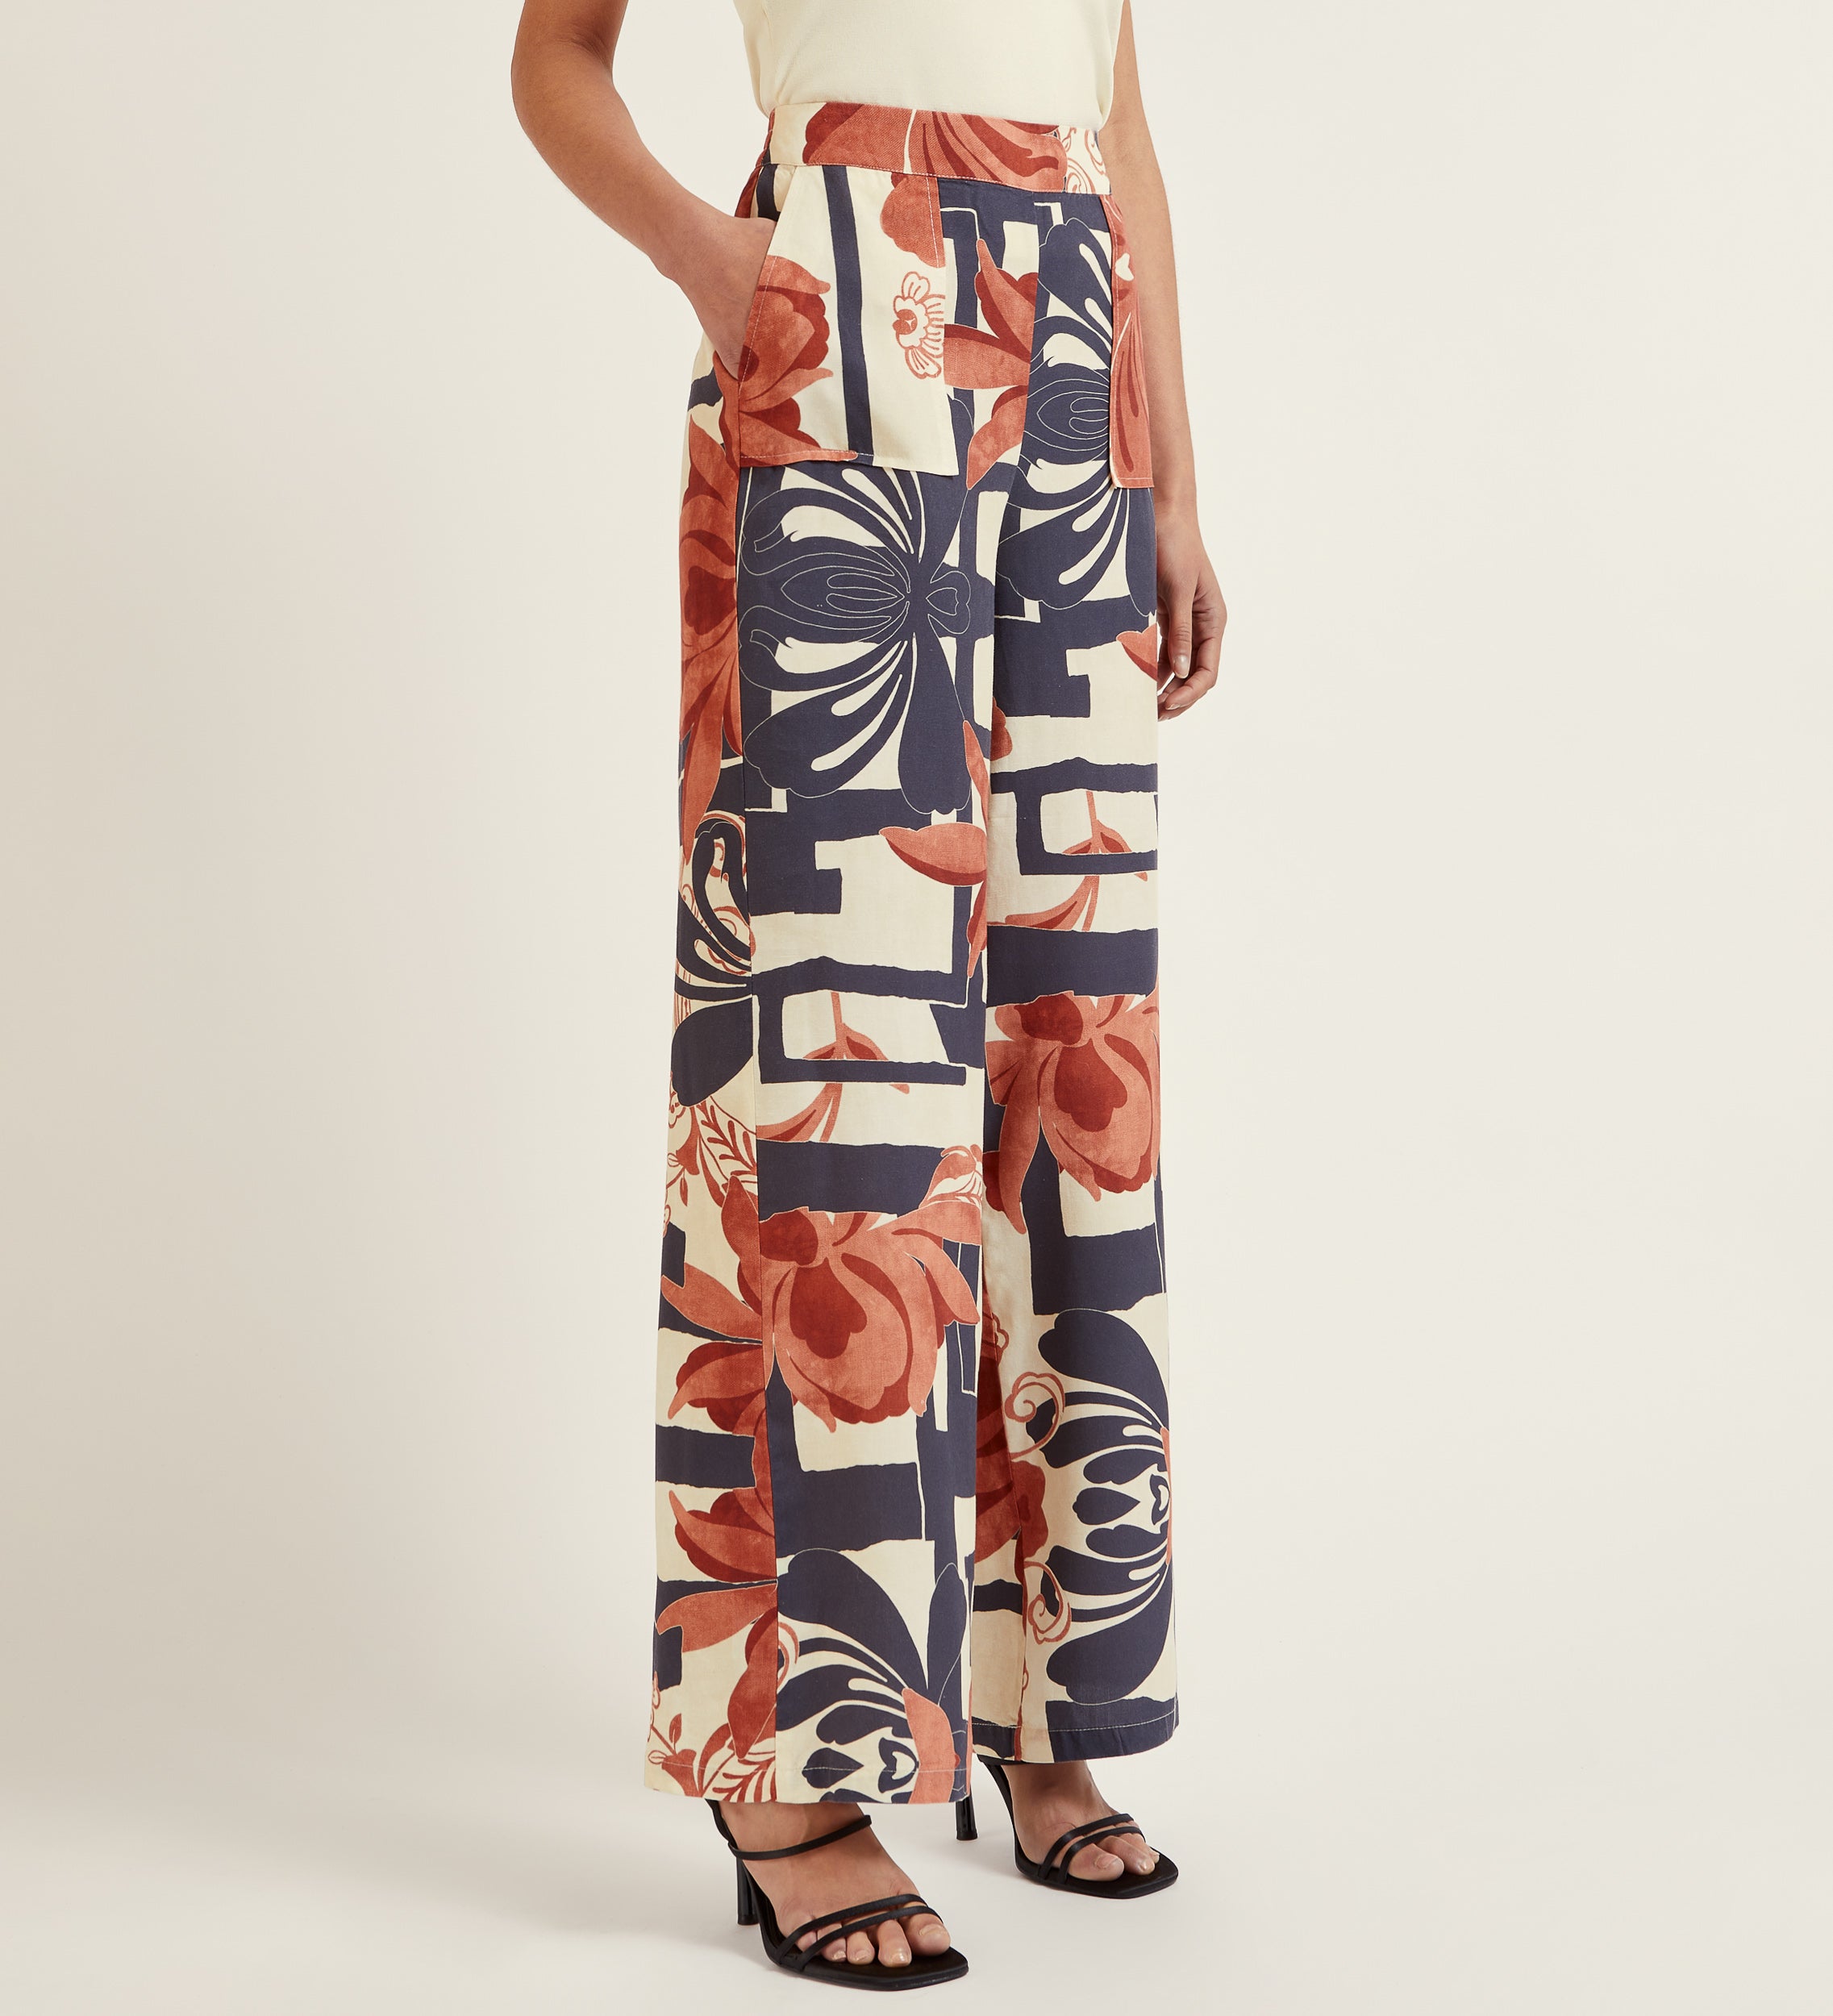 Flowy printed linen trousers